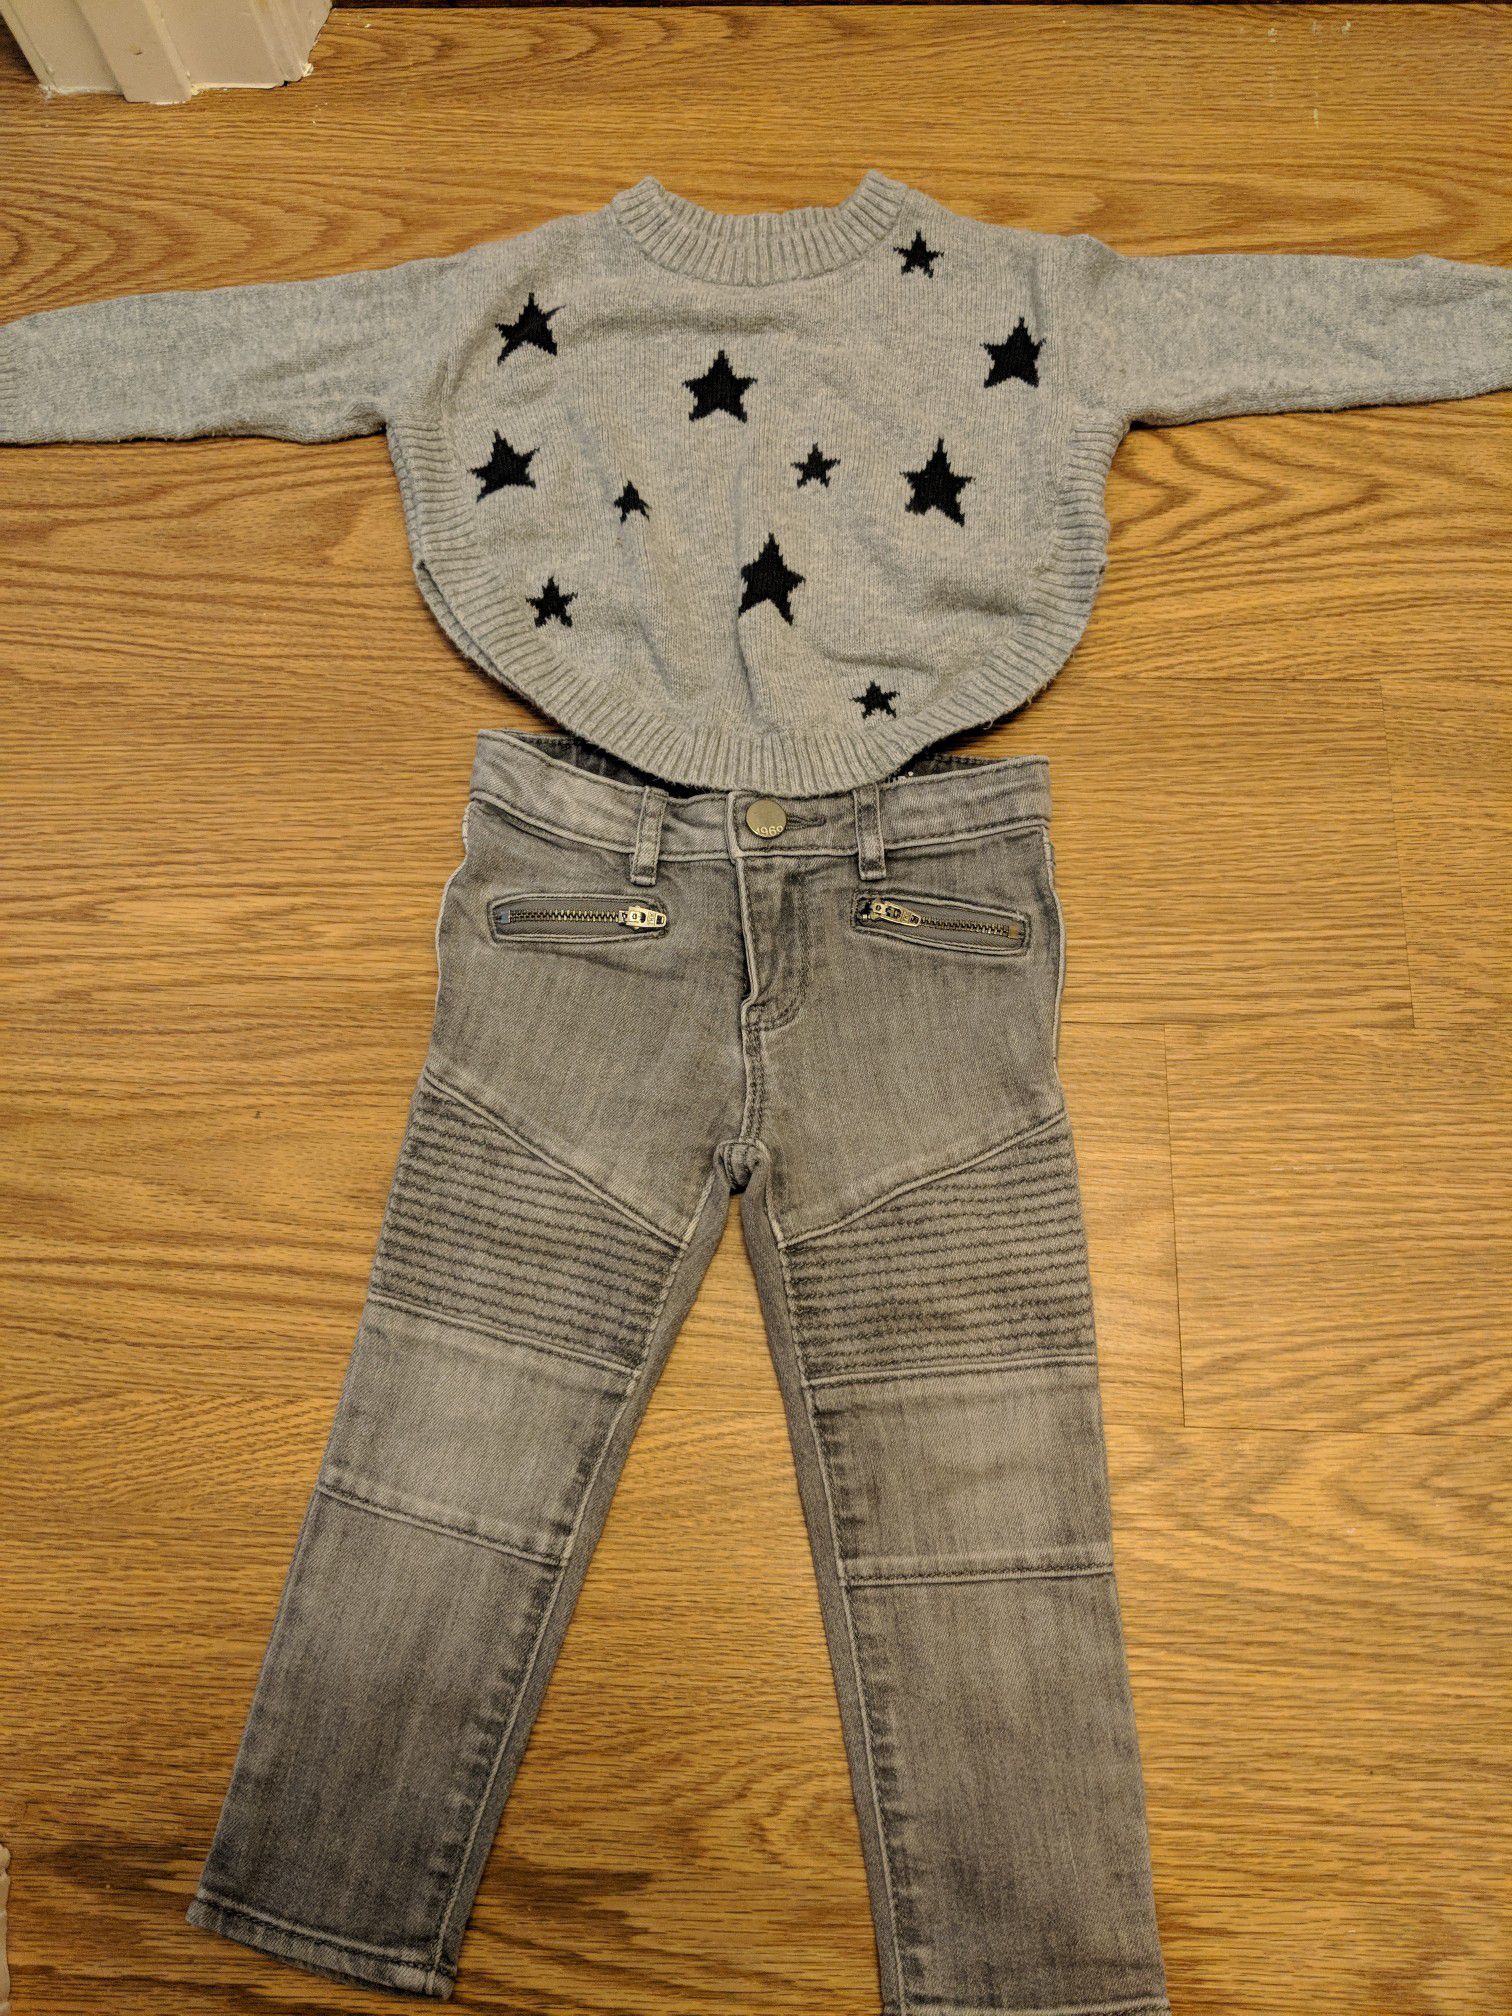 Toddler outfit